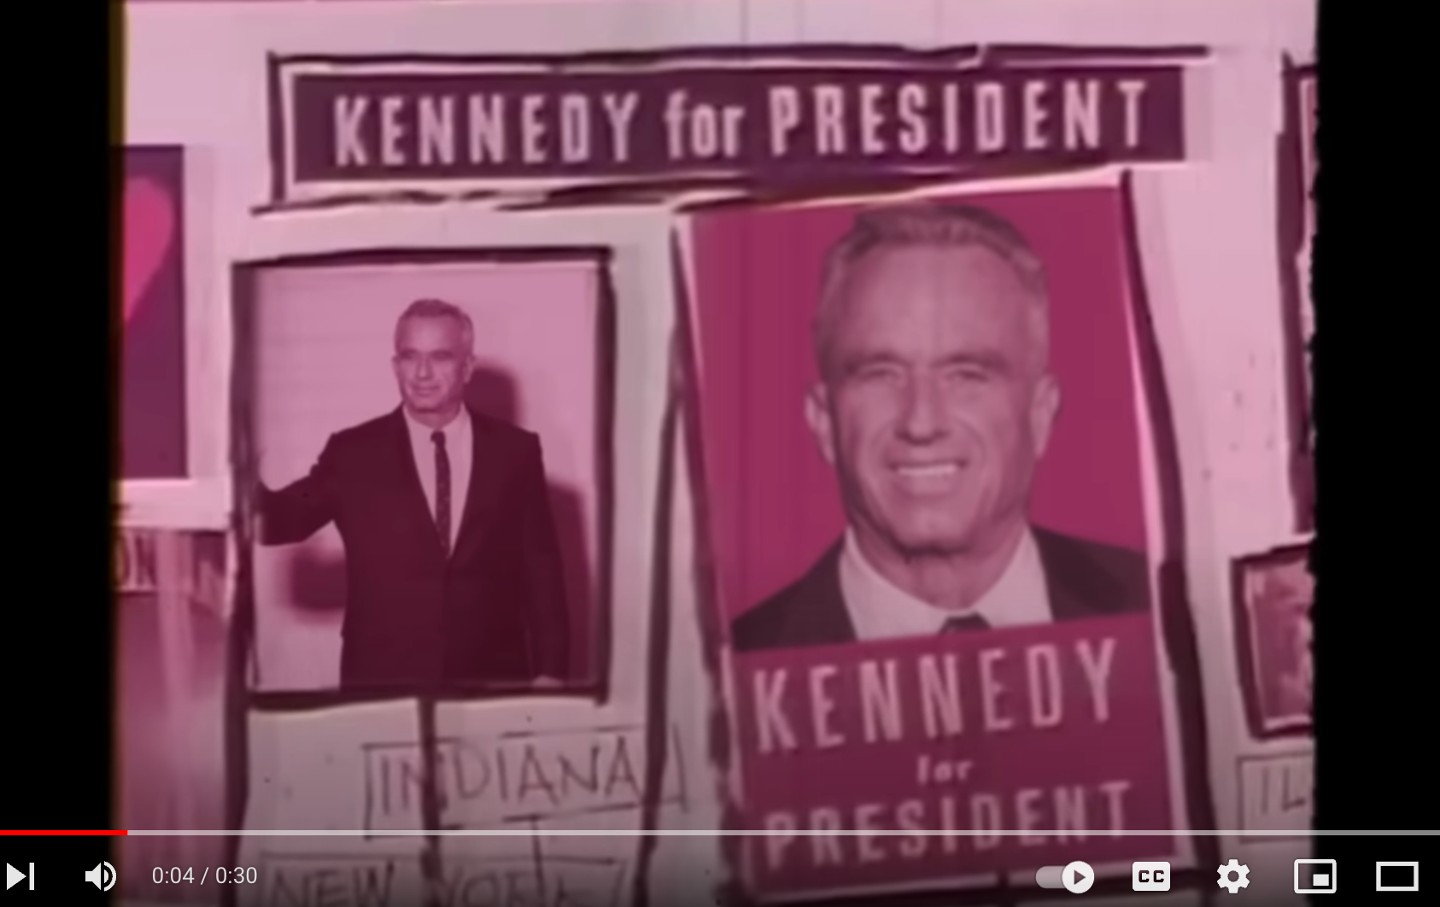 A still from the Super Bowl ad for RFK Jr showing photos of him with text reading 